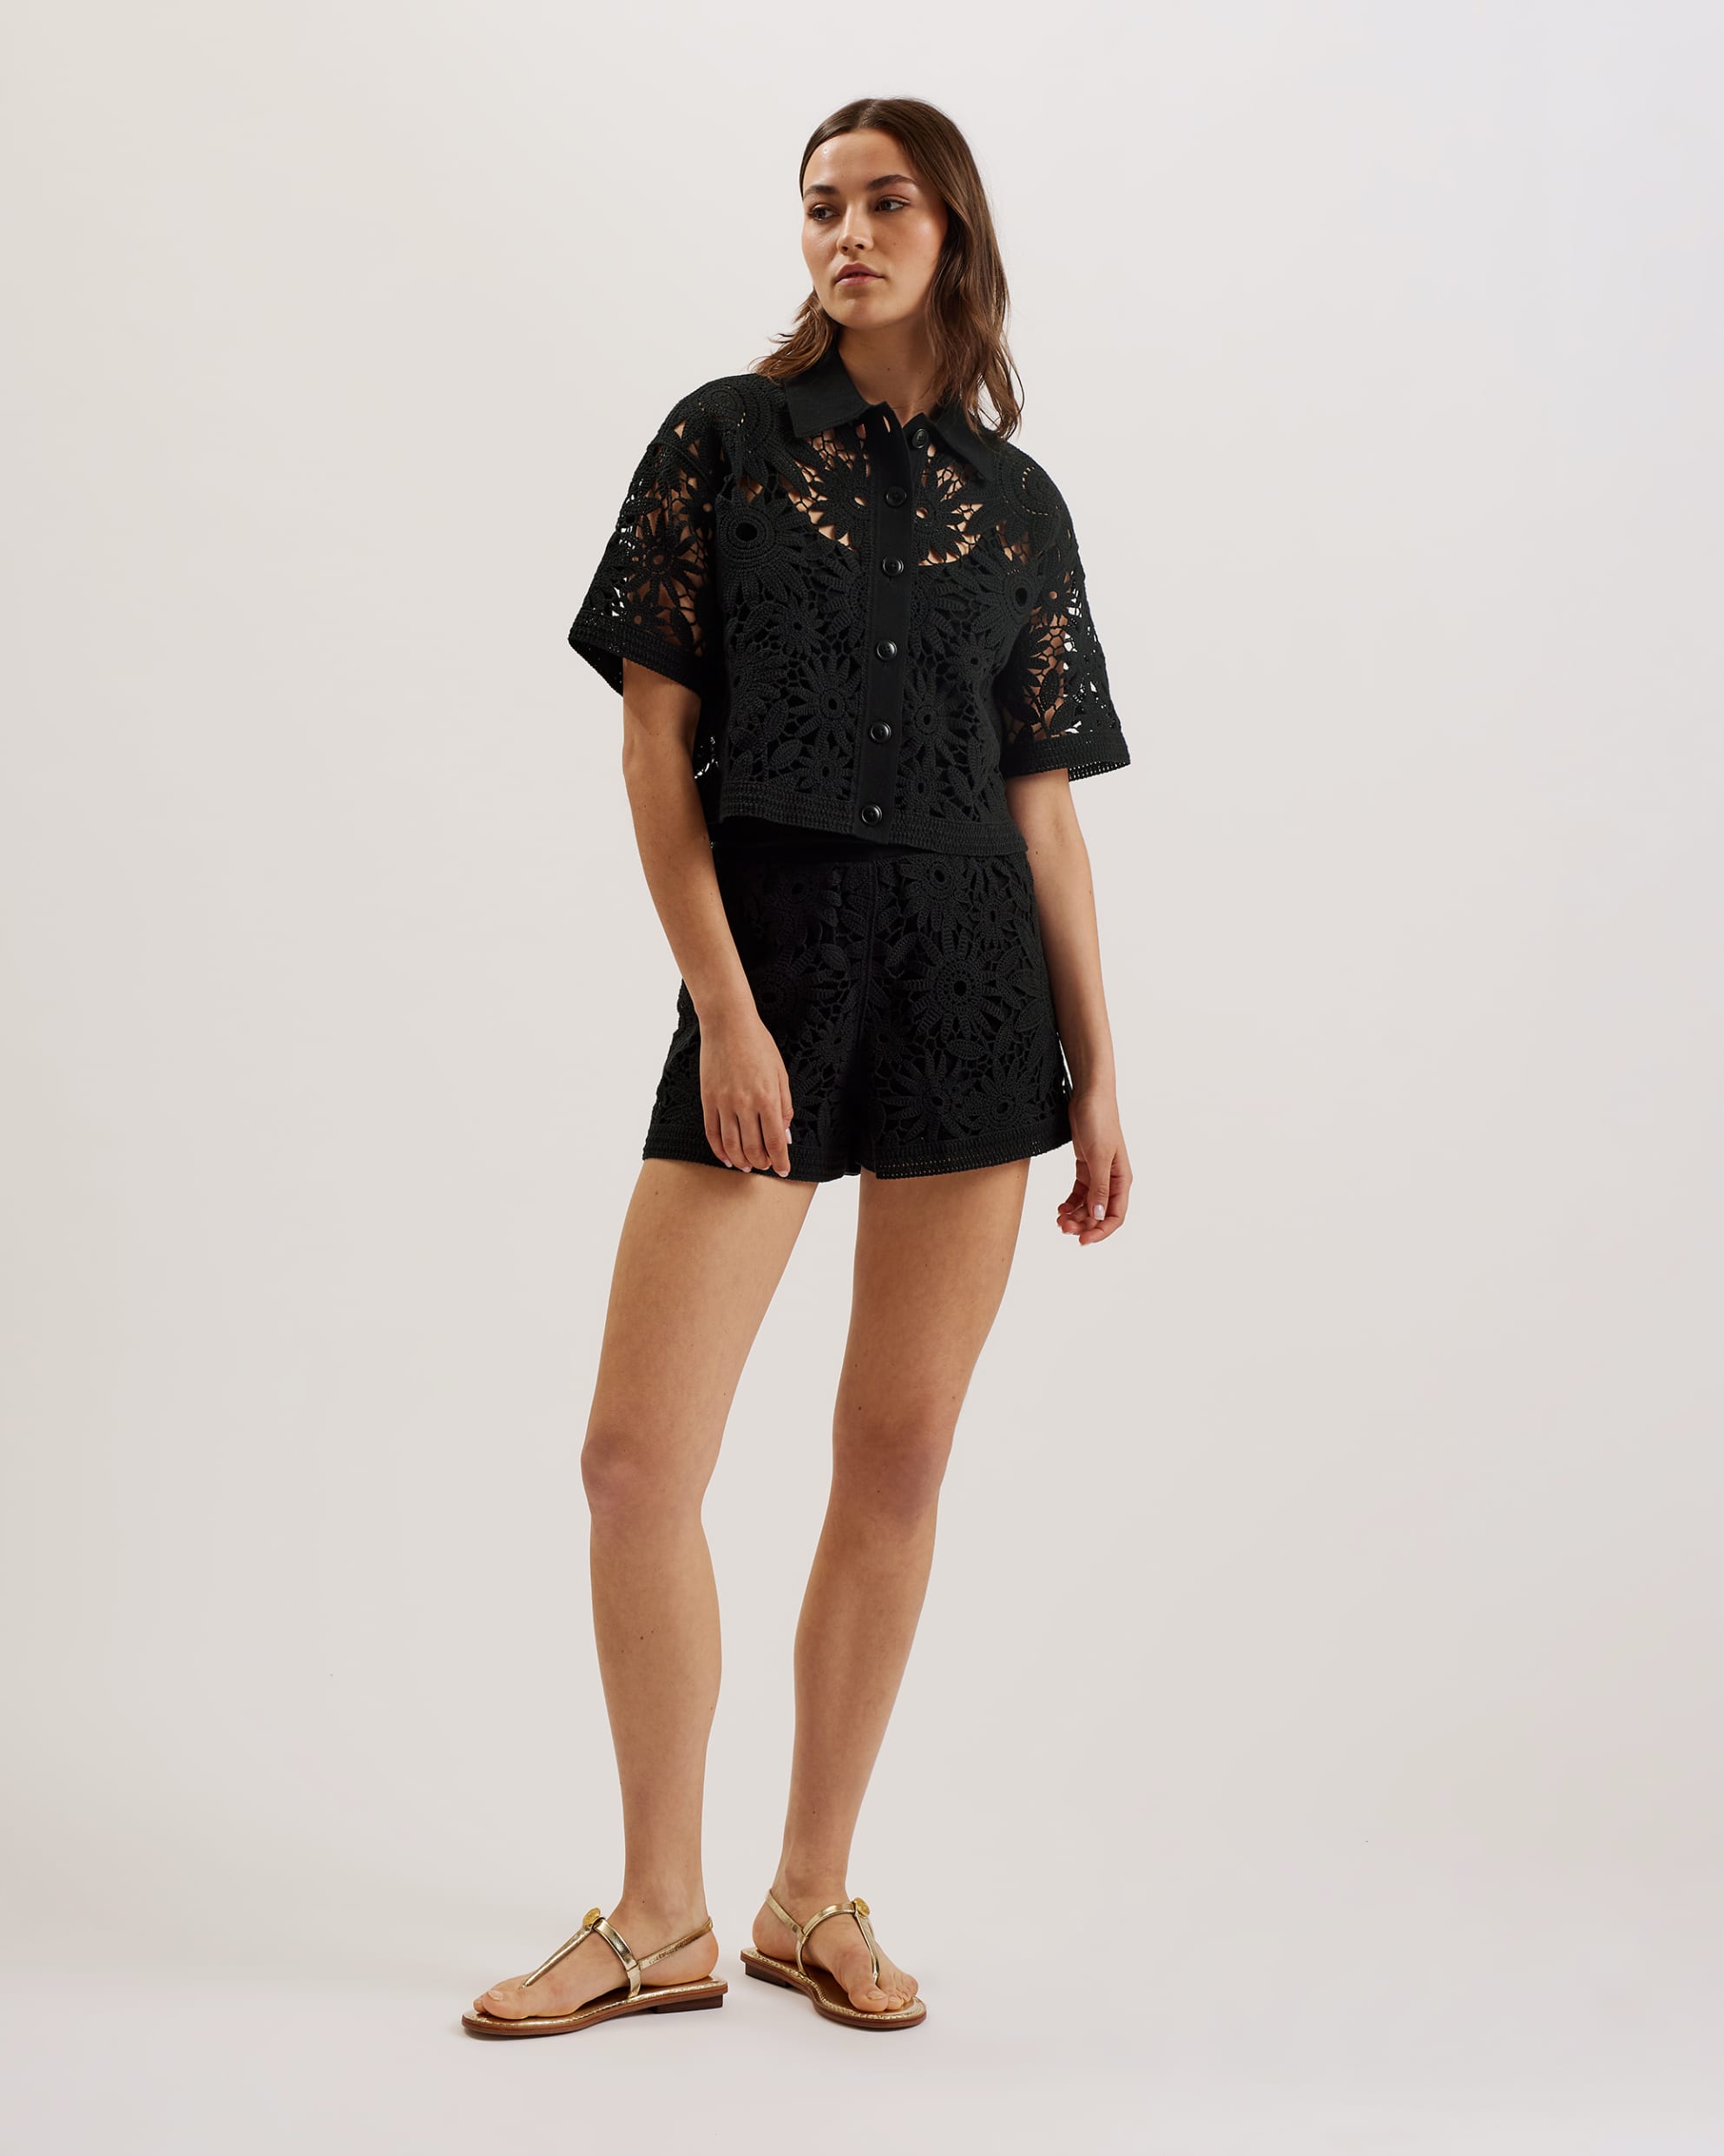 Angiiee Floral Crochet Boxy Cropped Shirt Black